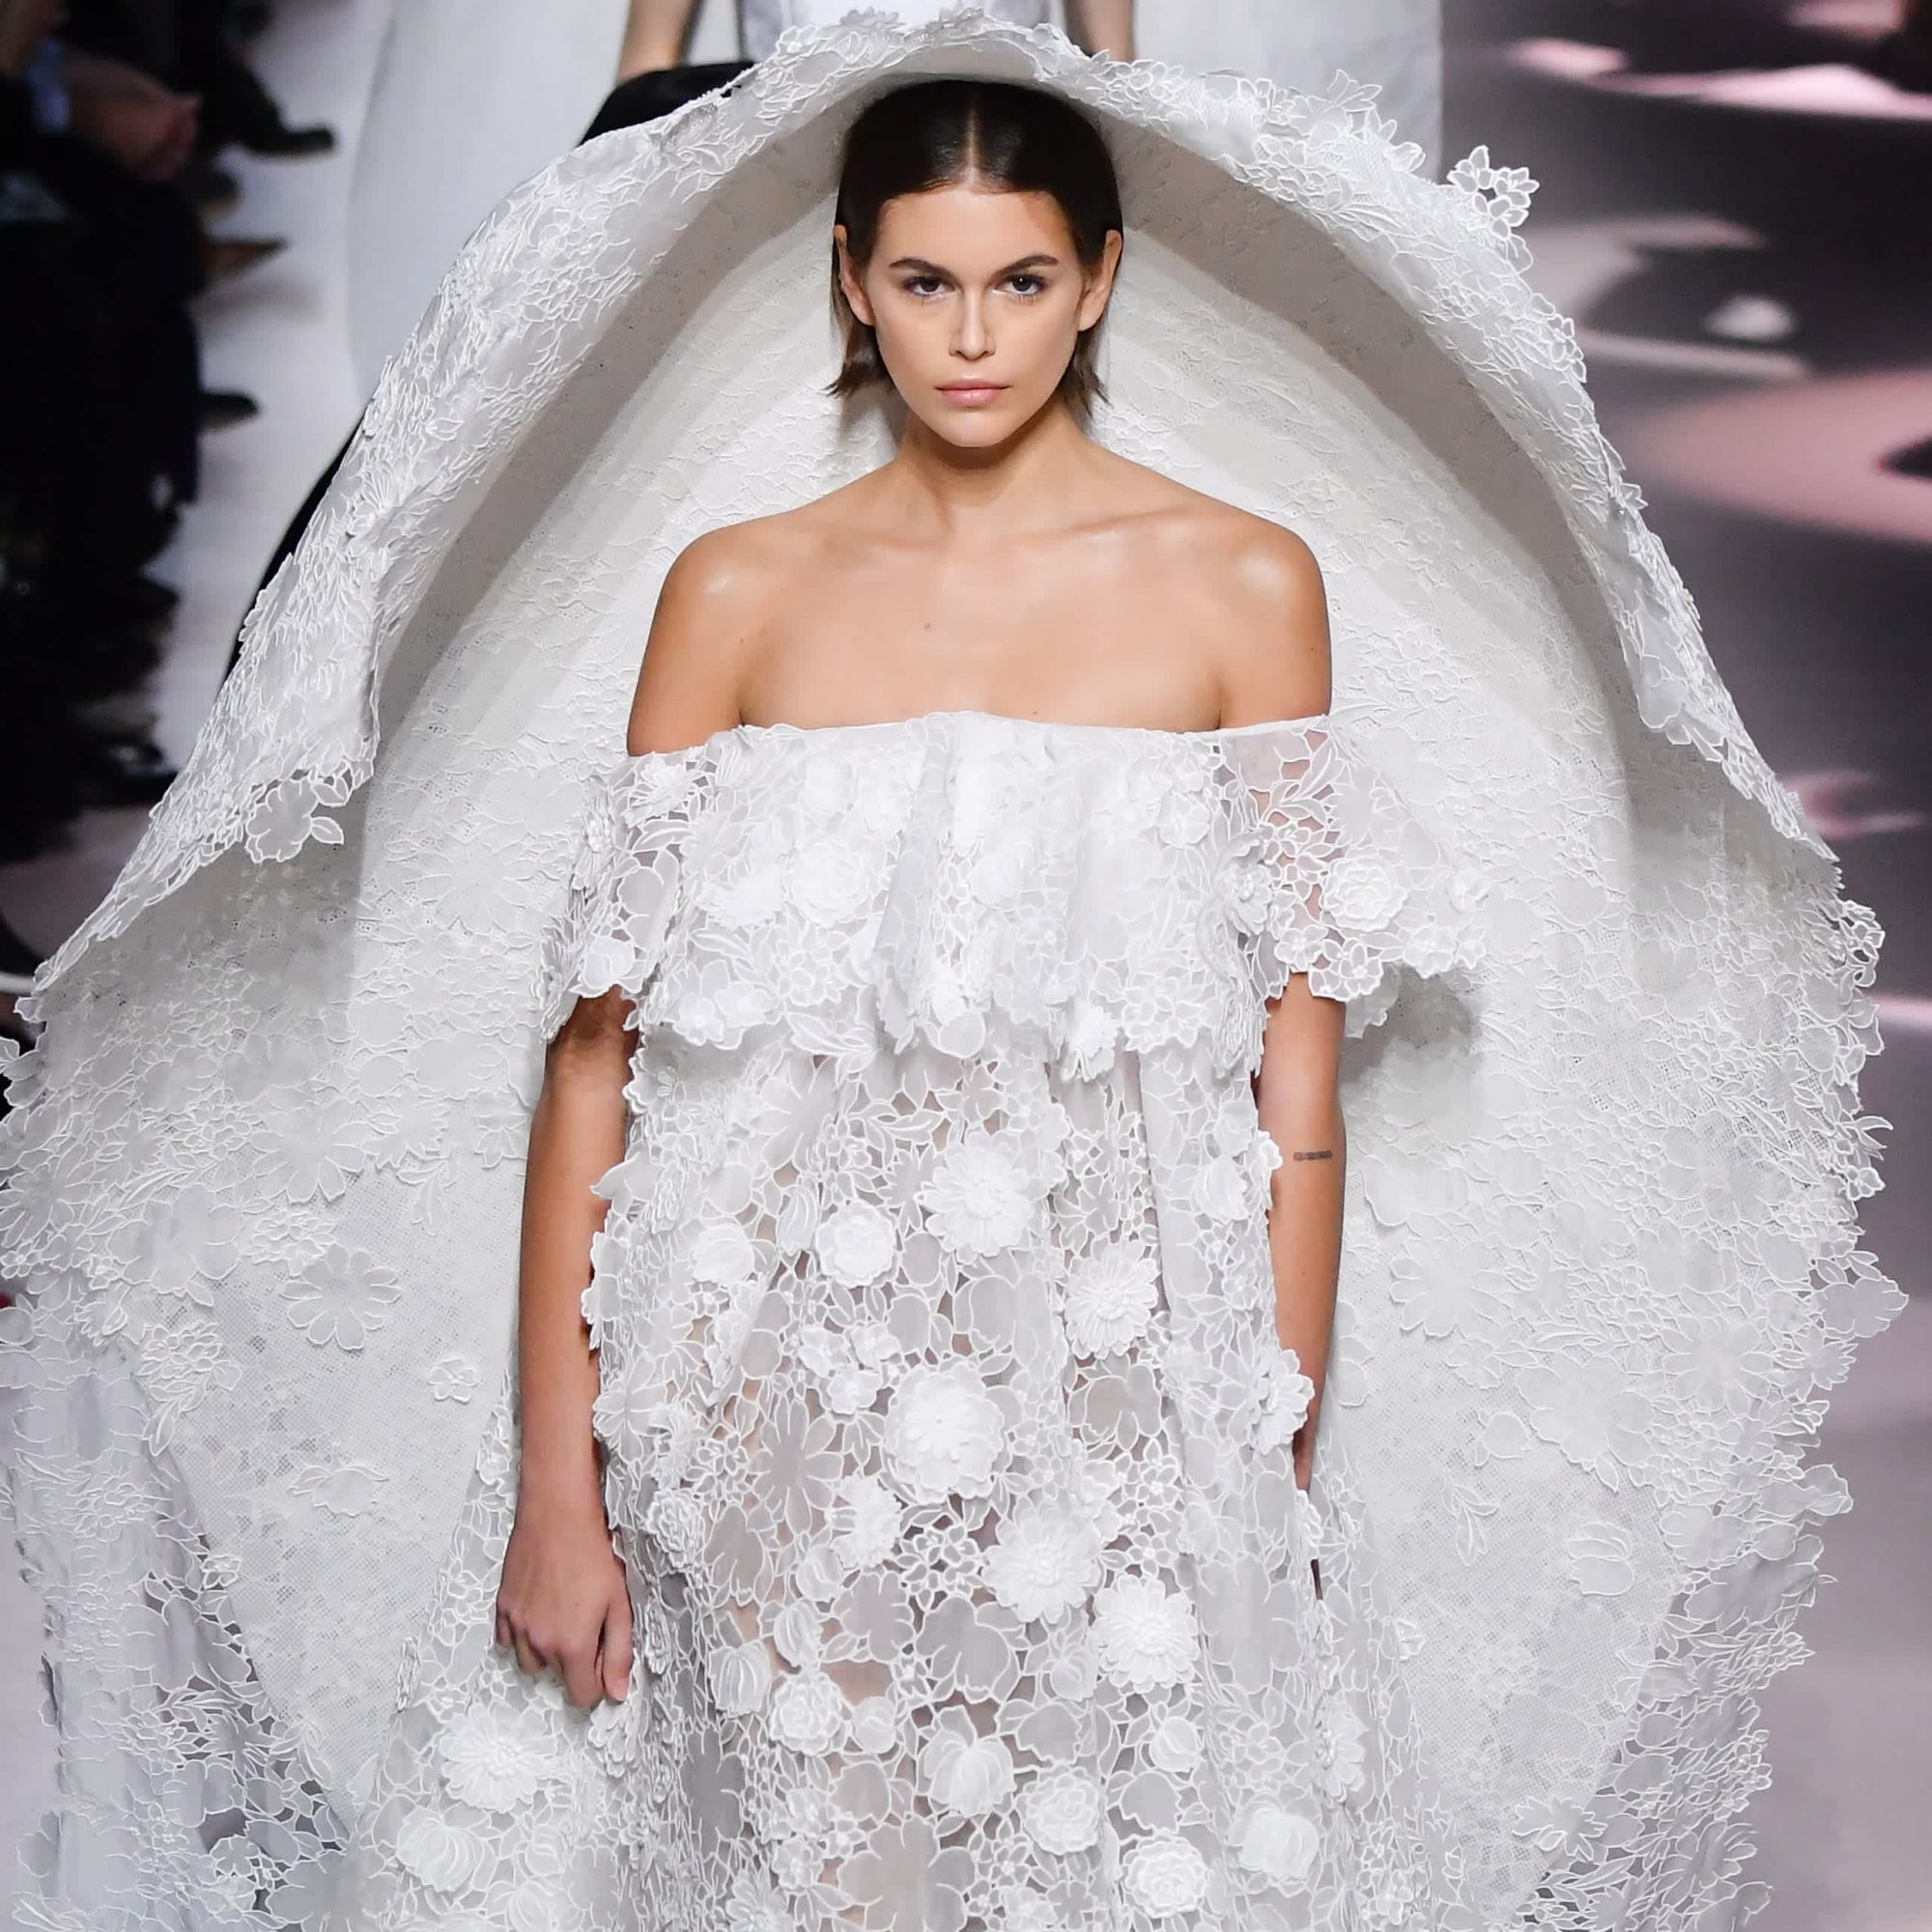 Kaia Gerber's Givenchy Wedding Dress Comes With a Giant Veil That Says ...